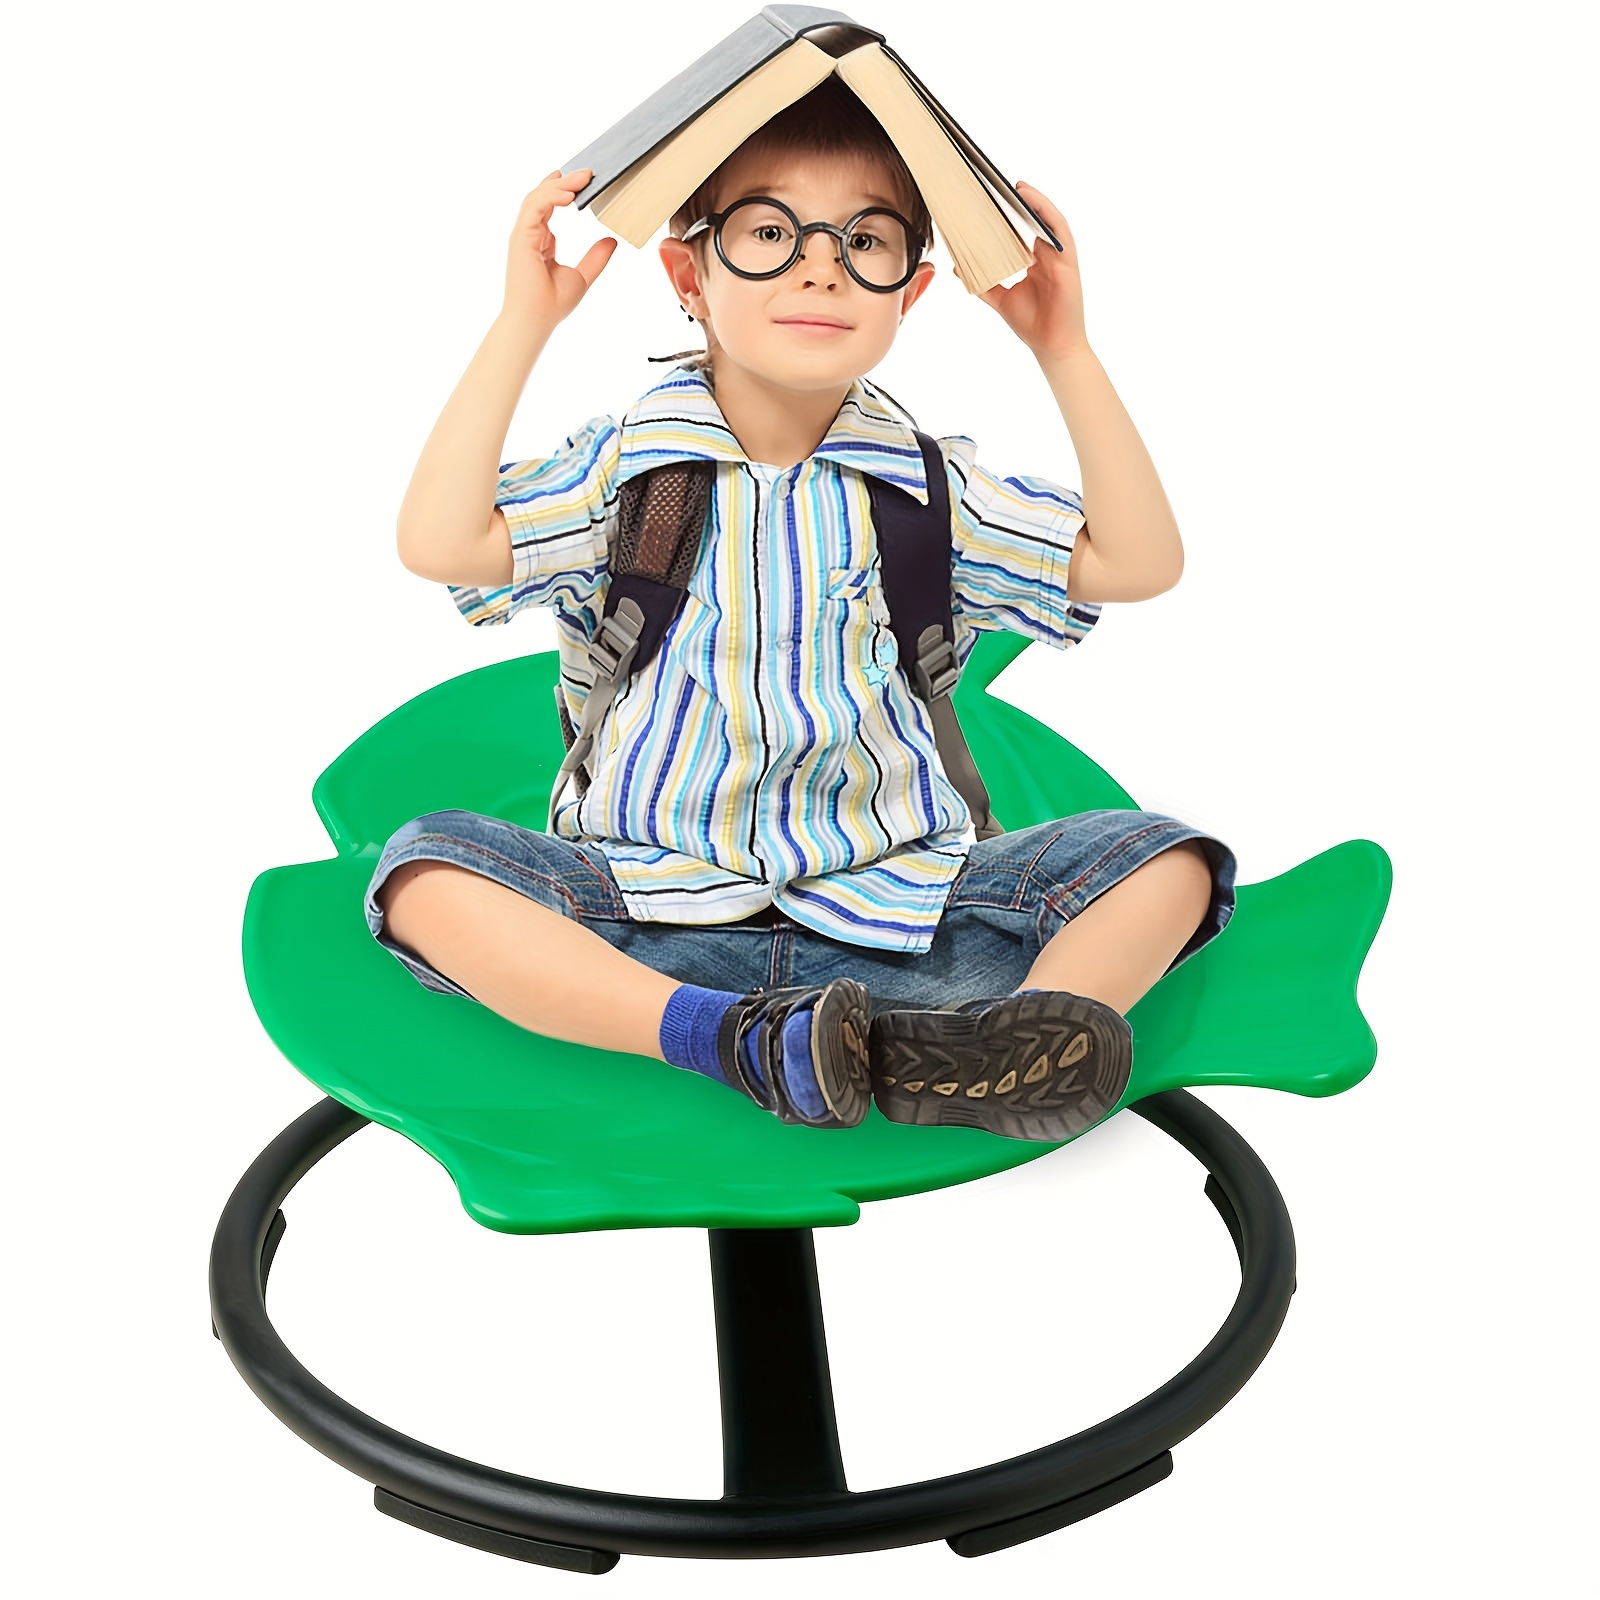 

Kids Swivel Chair, Sensory Spinning Chair For Kids, Body Sensory Toy Chair, Autism Children's Chair, Boost Balance And Coordination In Kids, Metal Base Chair, Non-slip